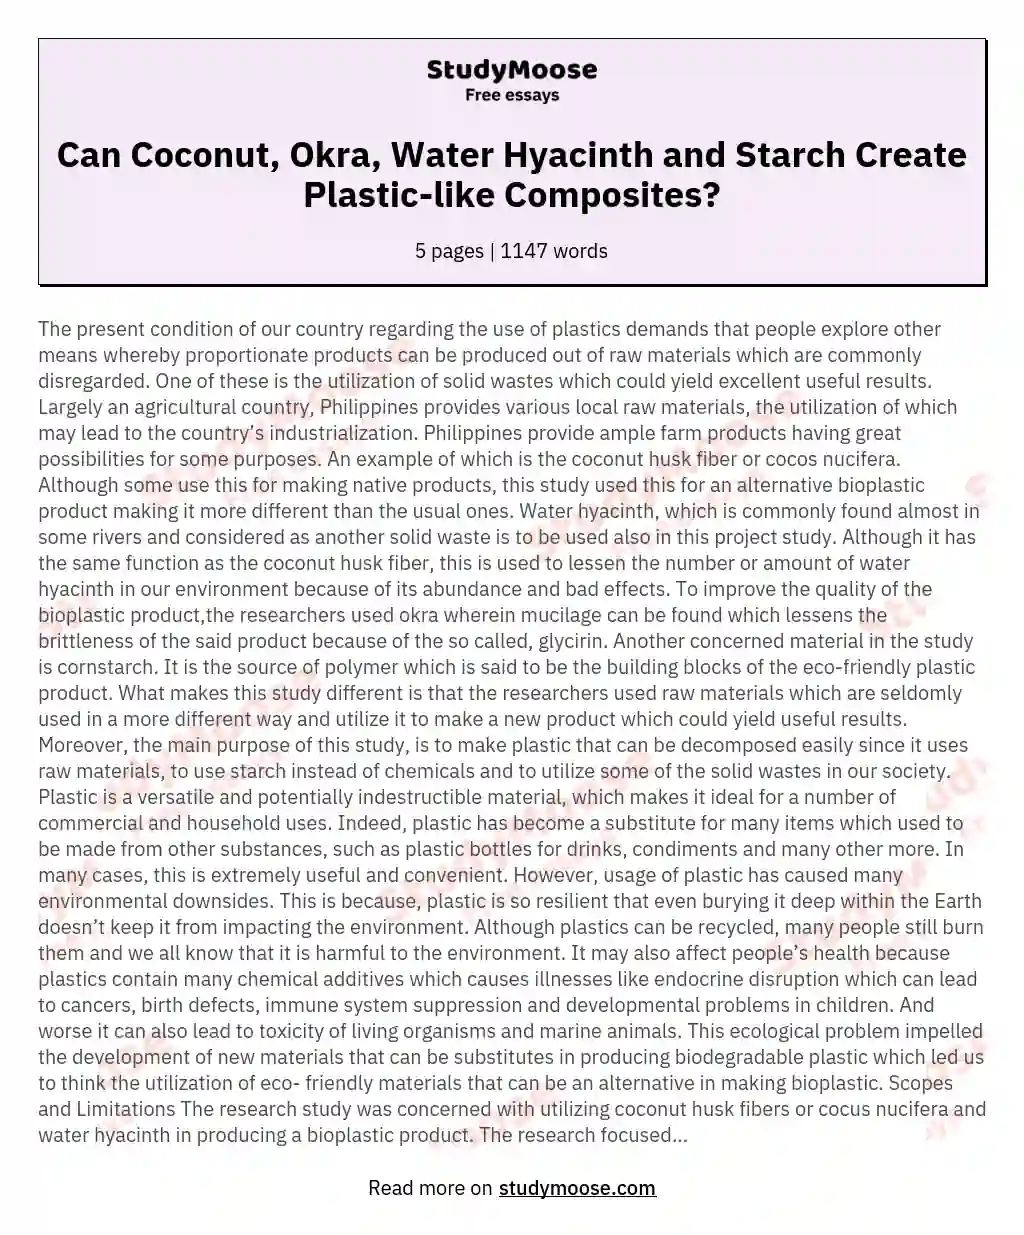 Can Coconut, Okra, Water Hyacinth and Starch Create Plastic-like Composites? essay